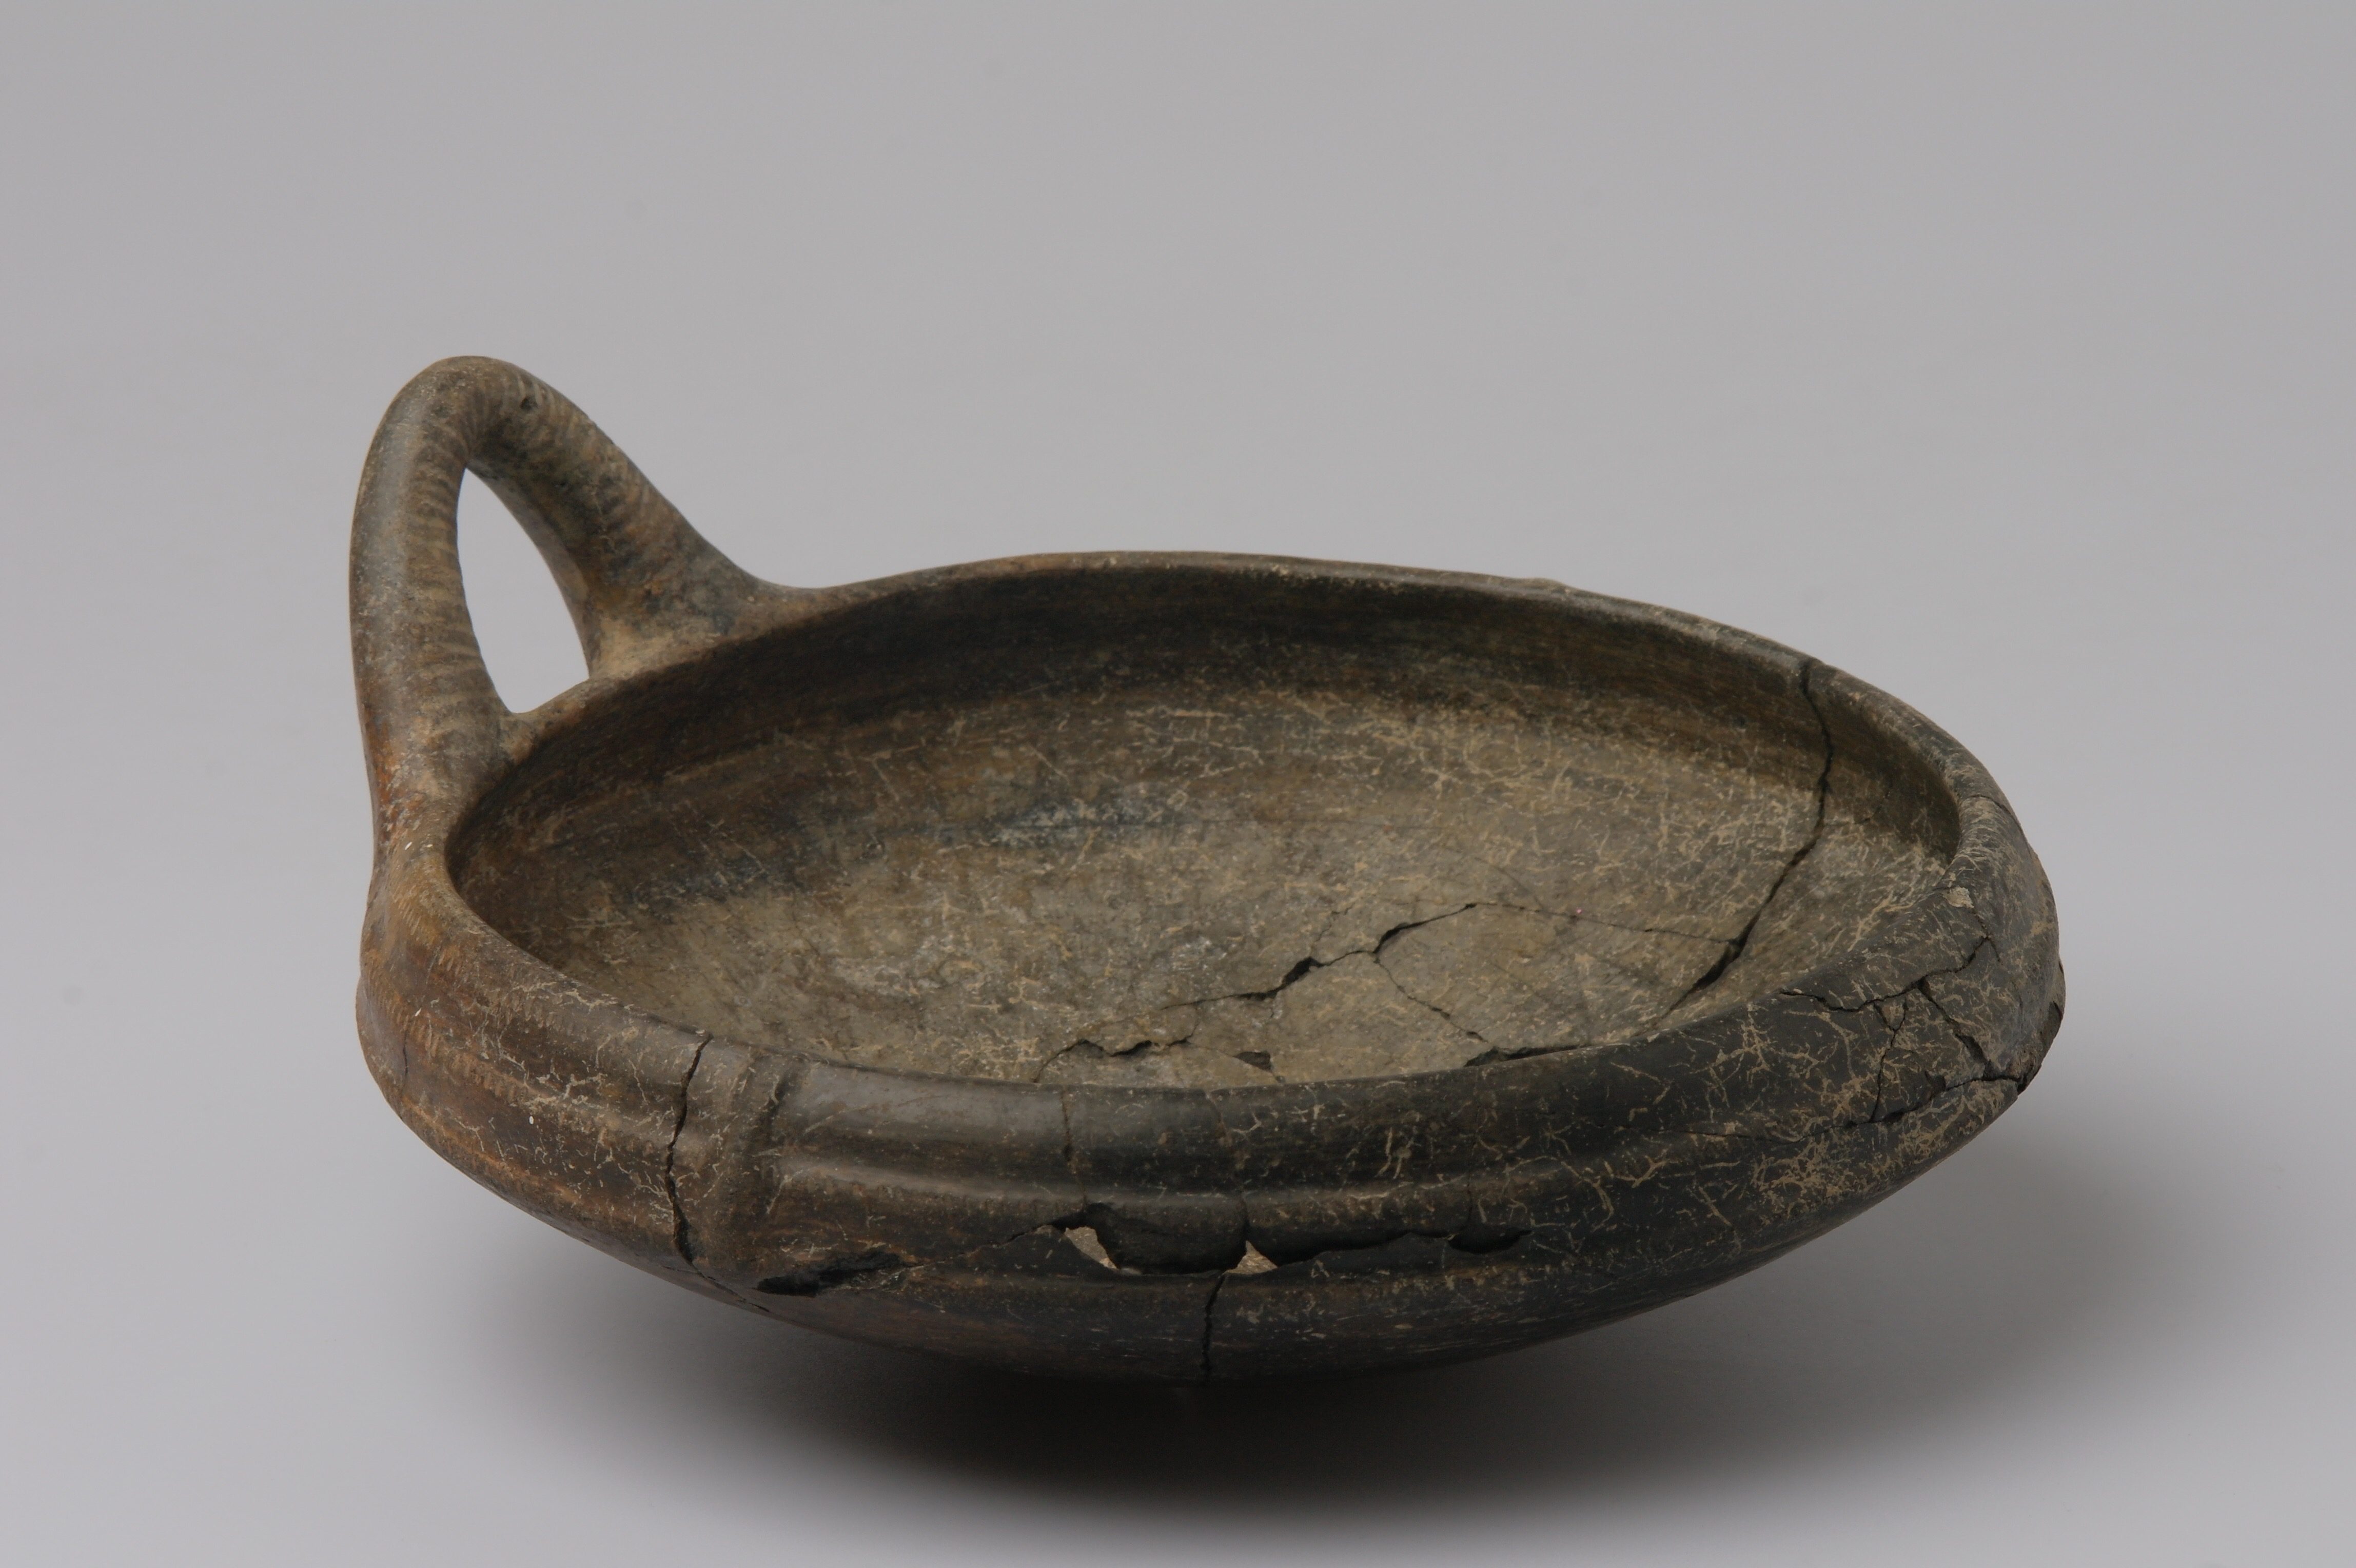 Cracked Etruscan pottery during conservation